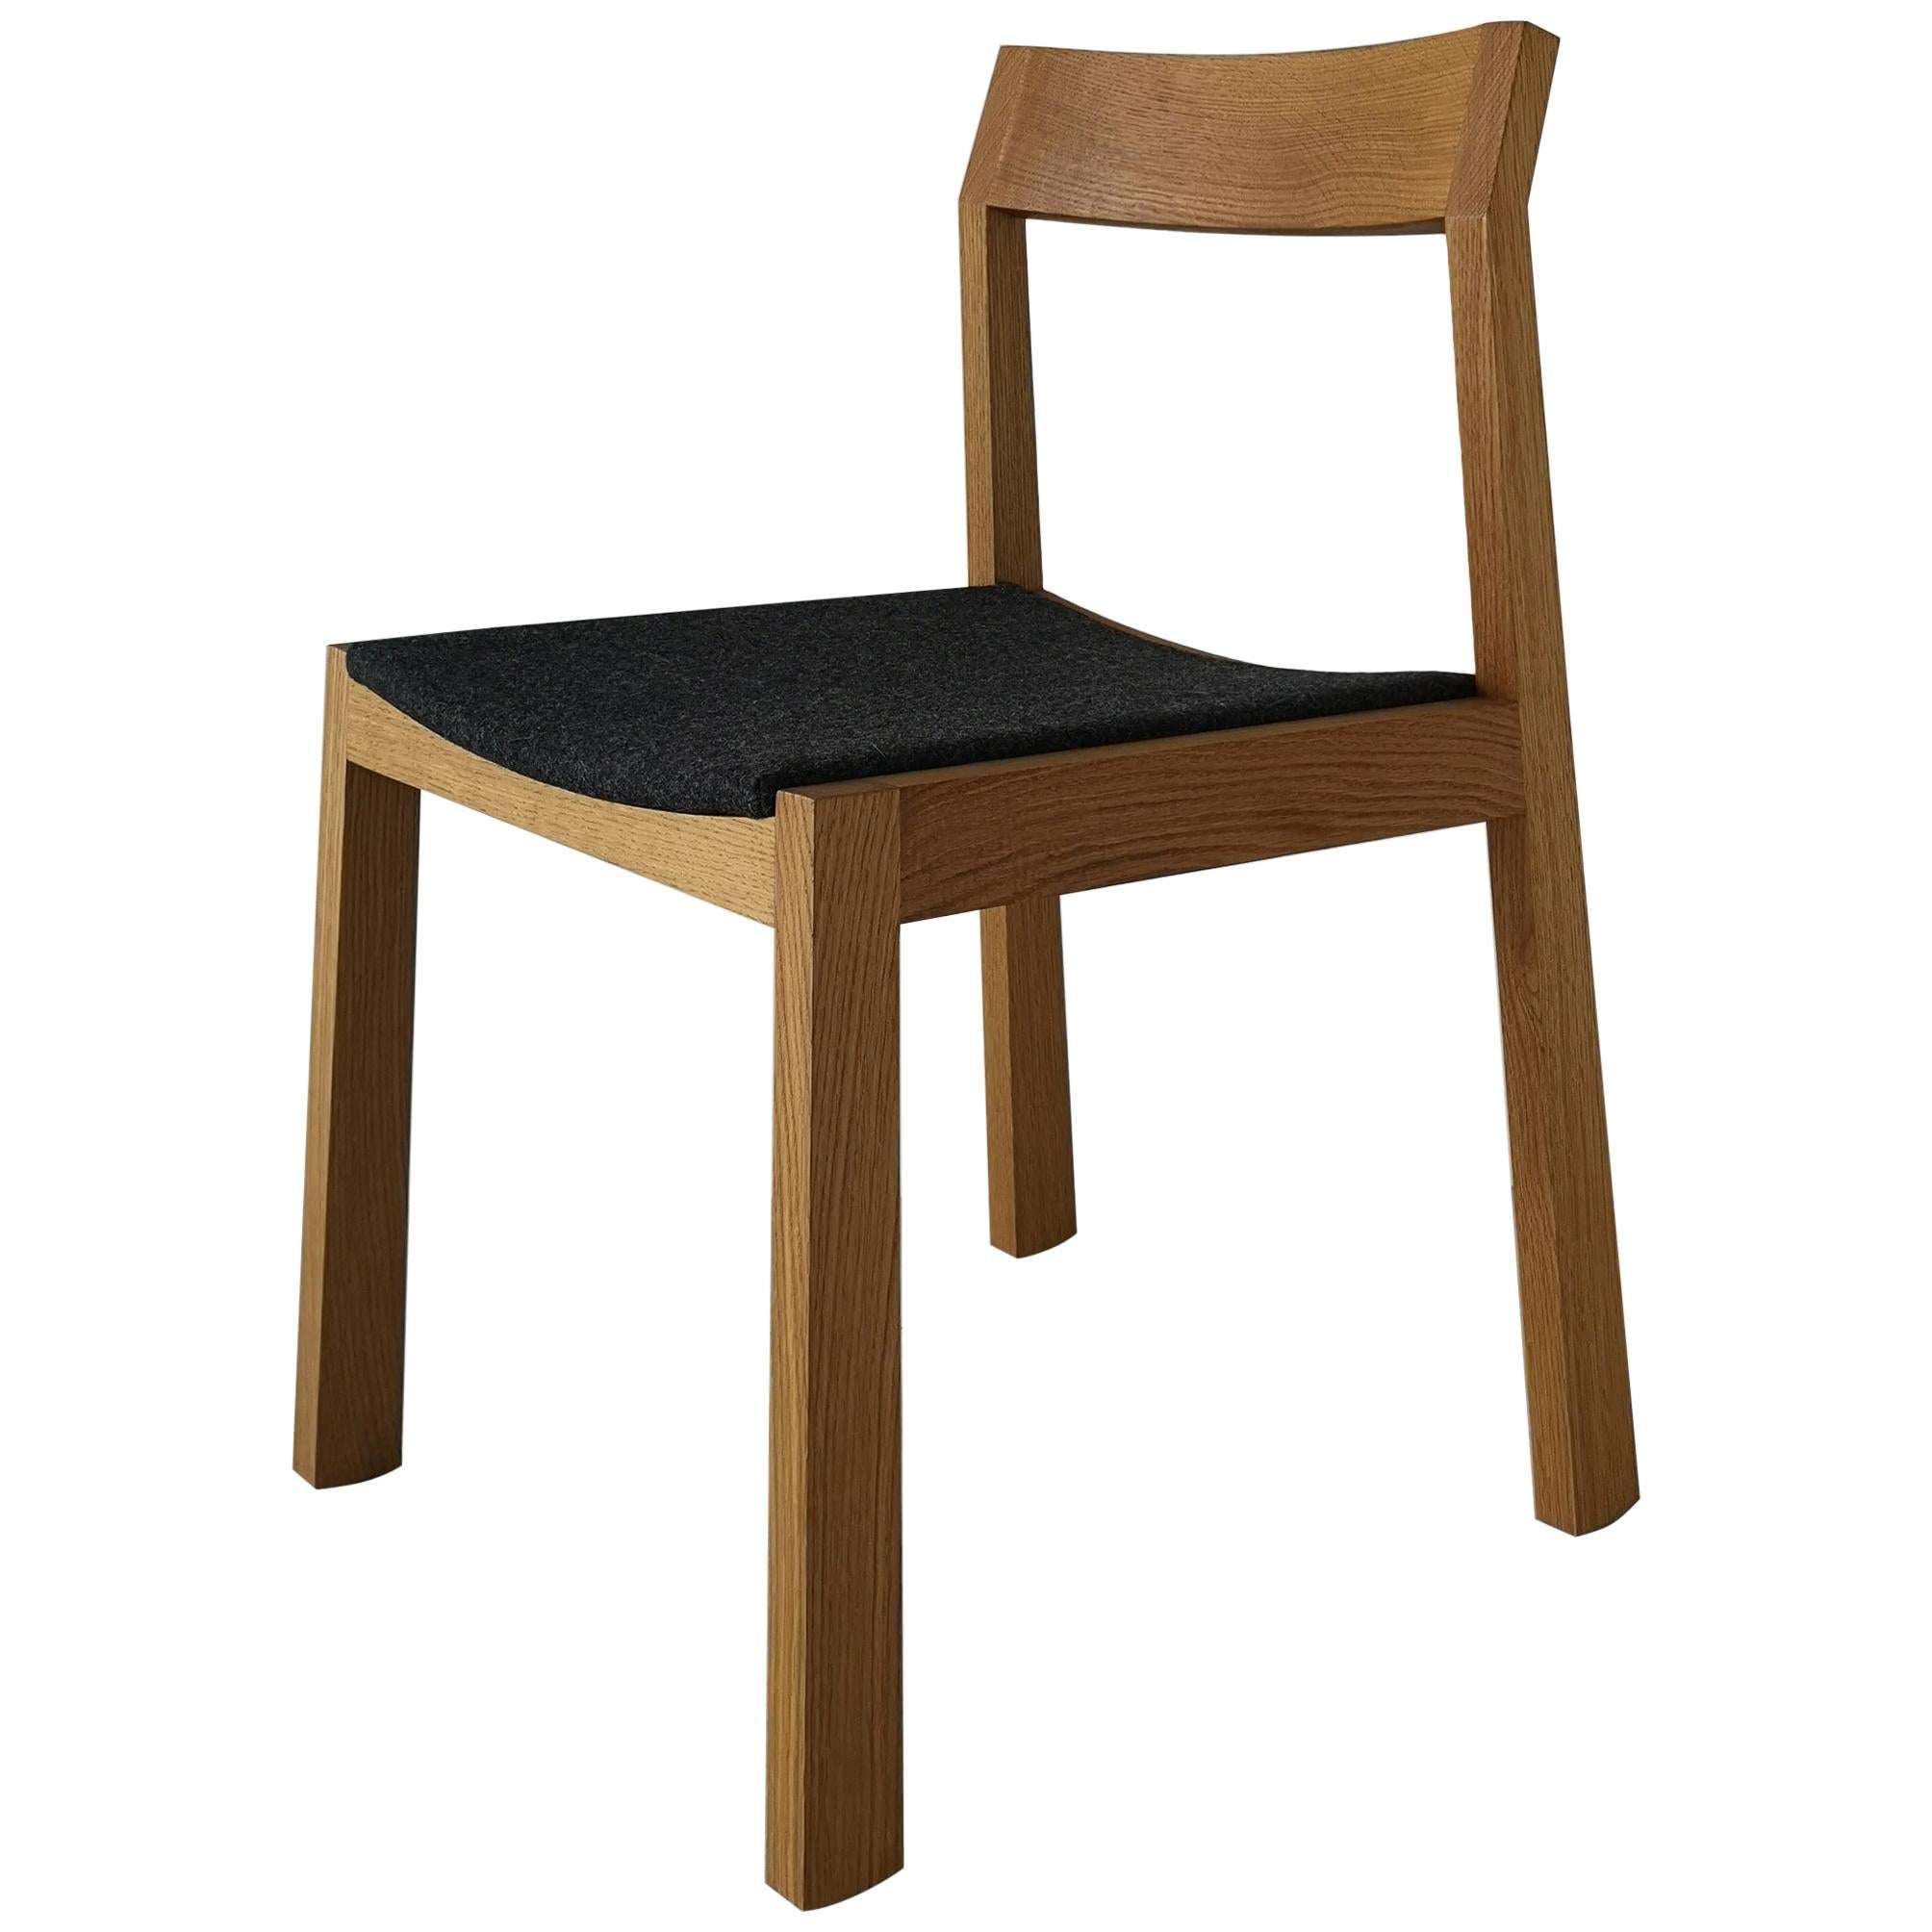 A+ Solid Hardwood Upholstered Dining Chair by Izm Design For Sale